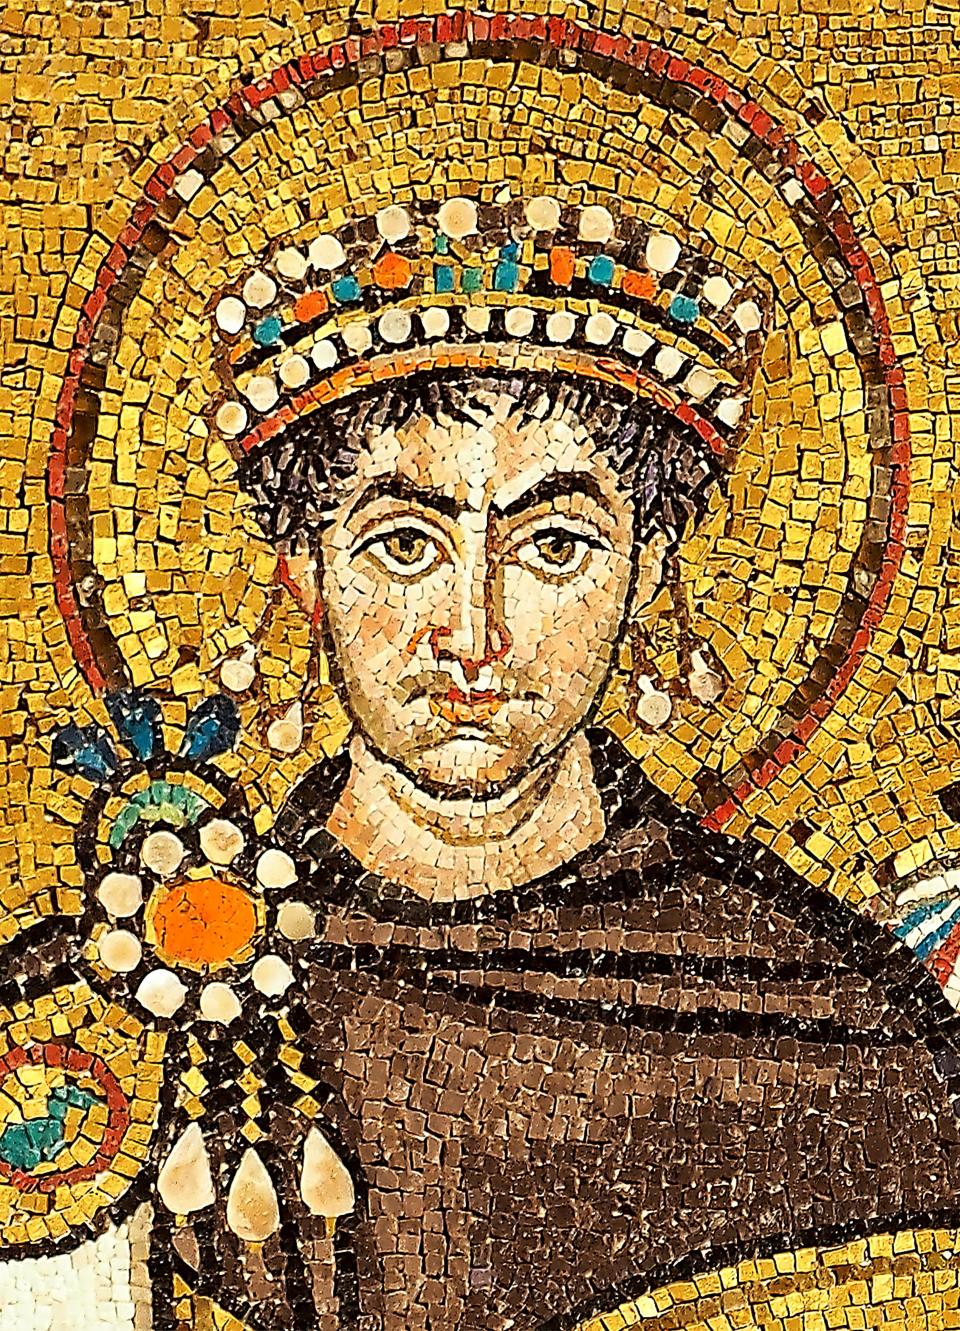 Mosaic depicting a historical figure with a halo and ornate headpiece